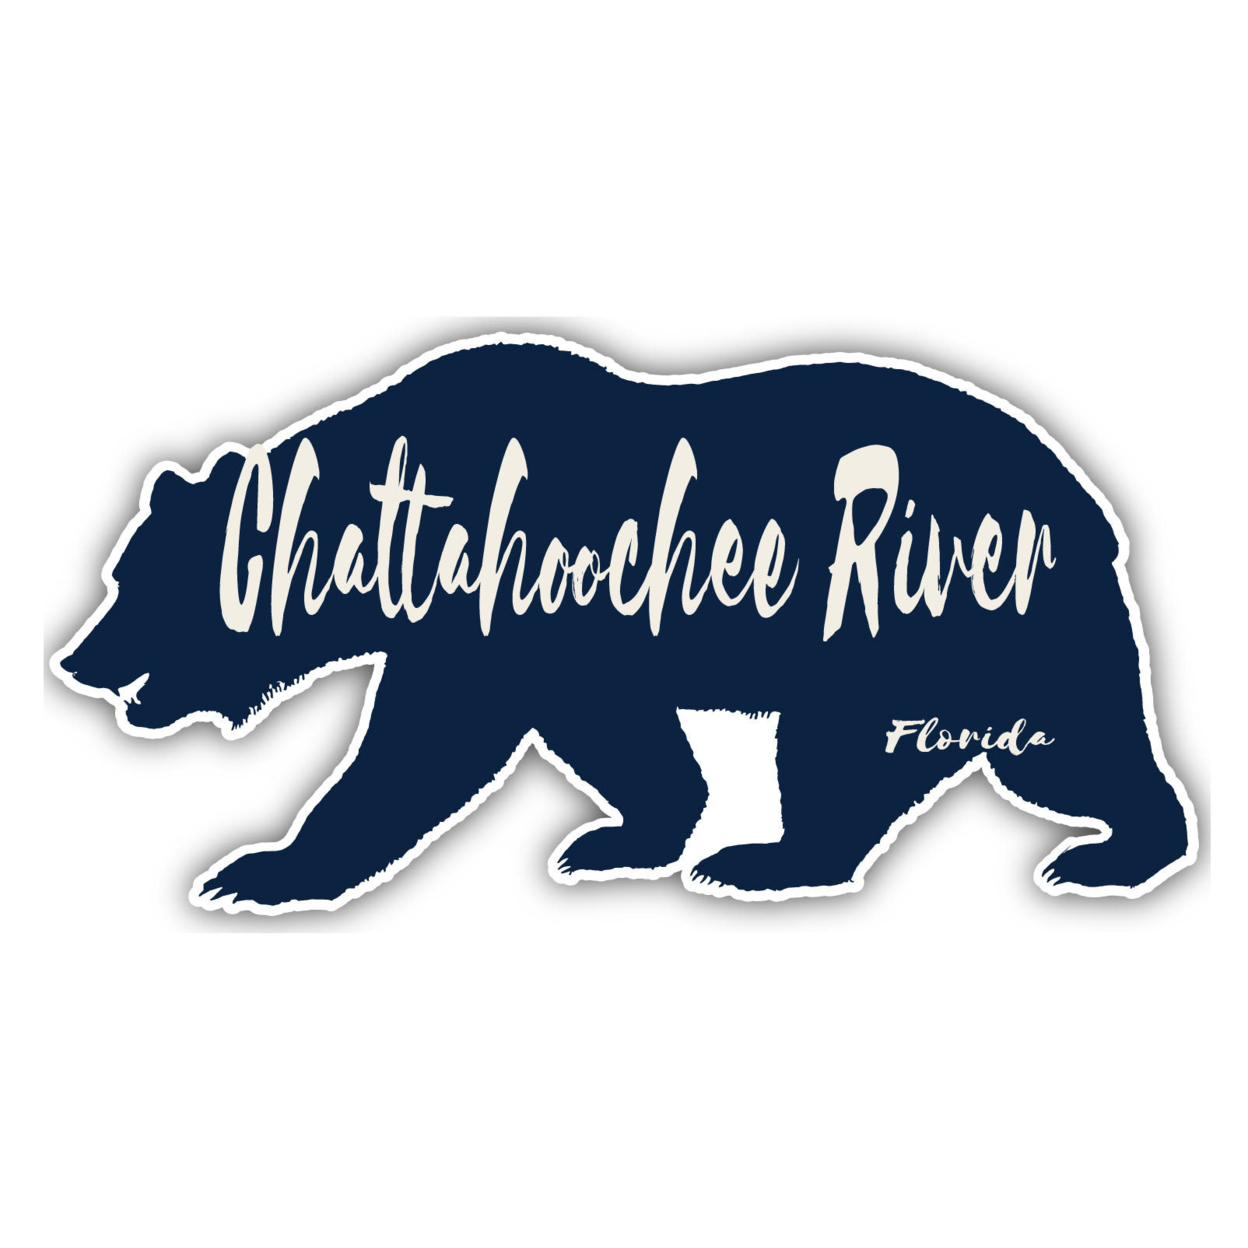 Chattahoochee River Florida Souvenir Decorative Stickers (Choose Theme And Size) - 4-Pack, 12-Inch, Bear